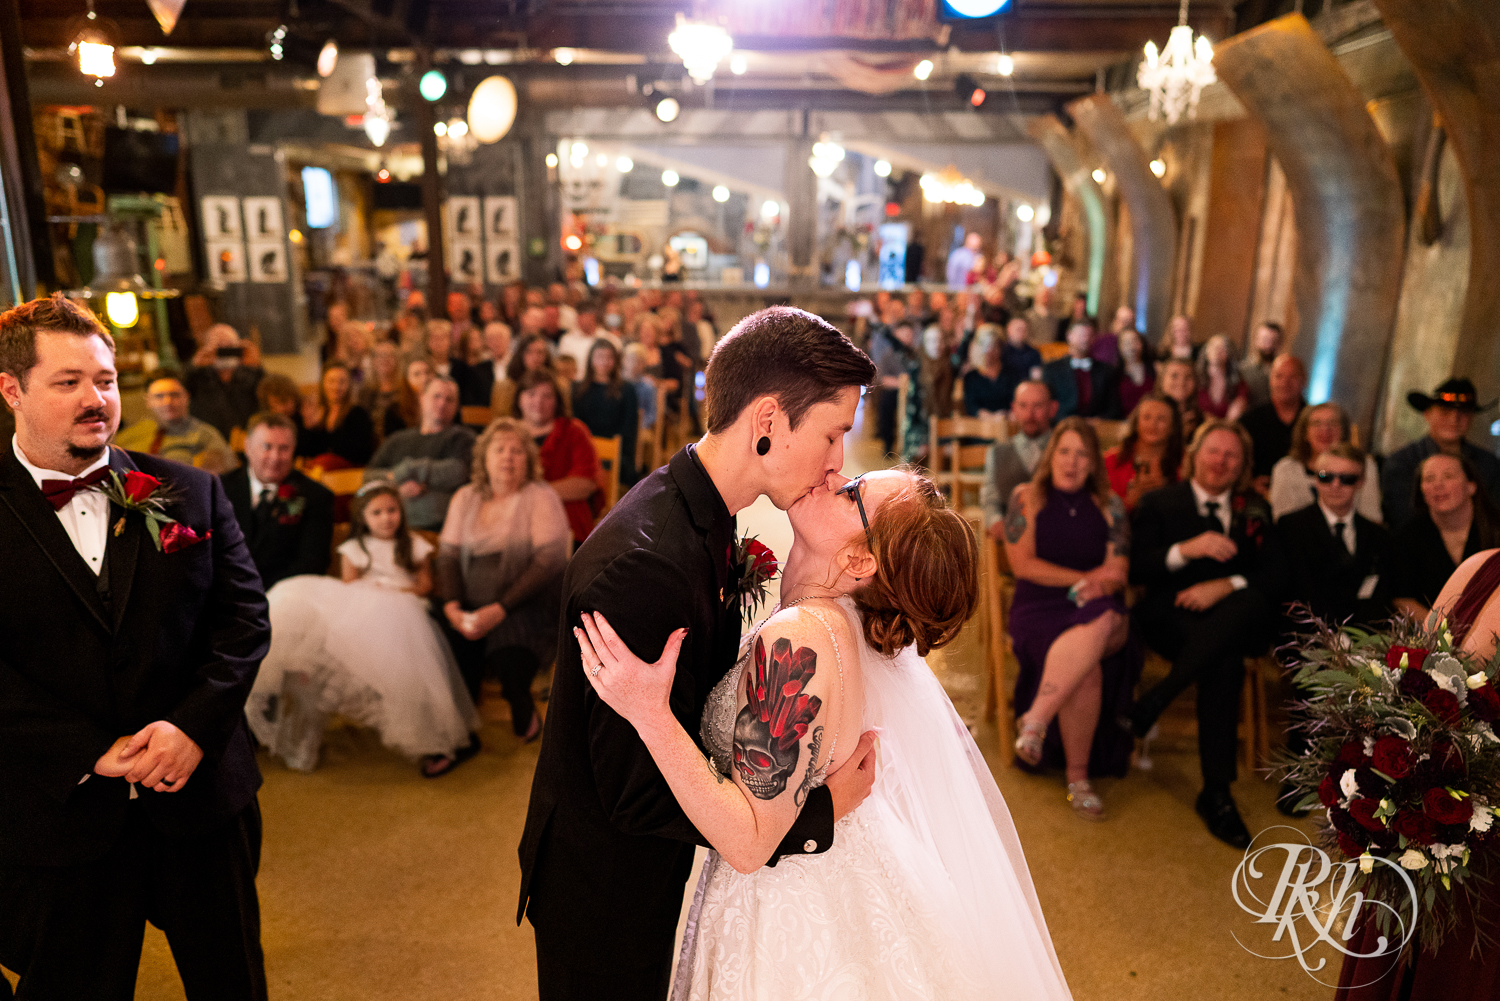 Bride and groom kissing at alter with guests in the background at Warehouse Winery in Saint Louis Park, Minnesota.